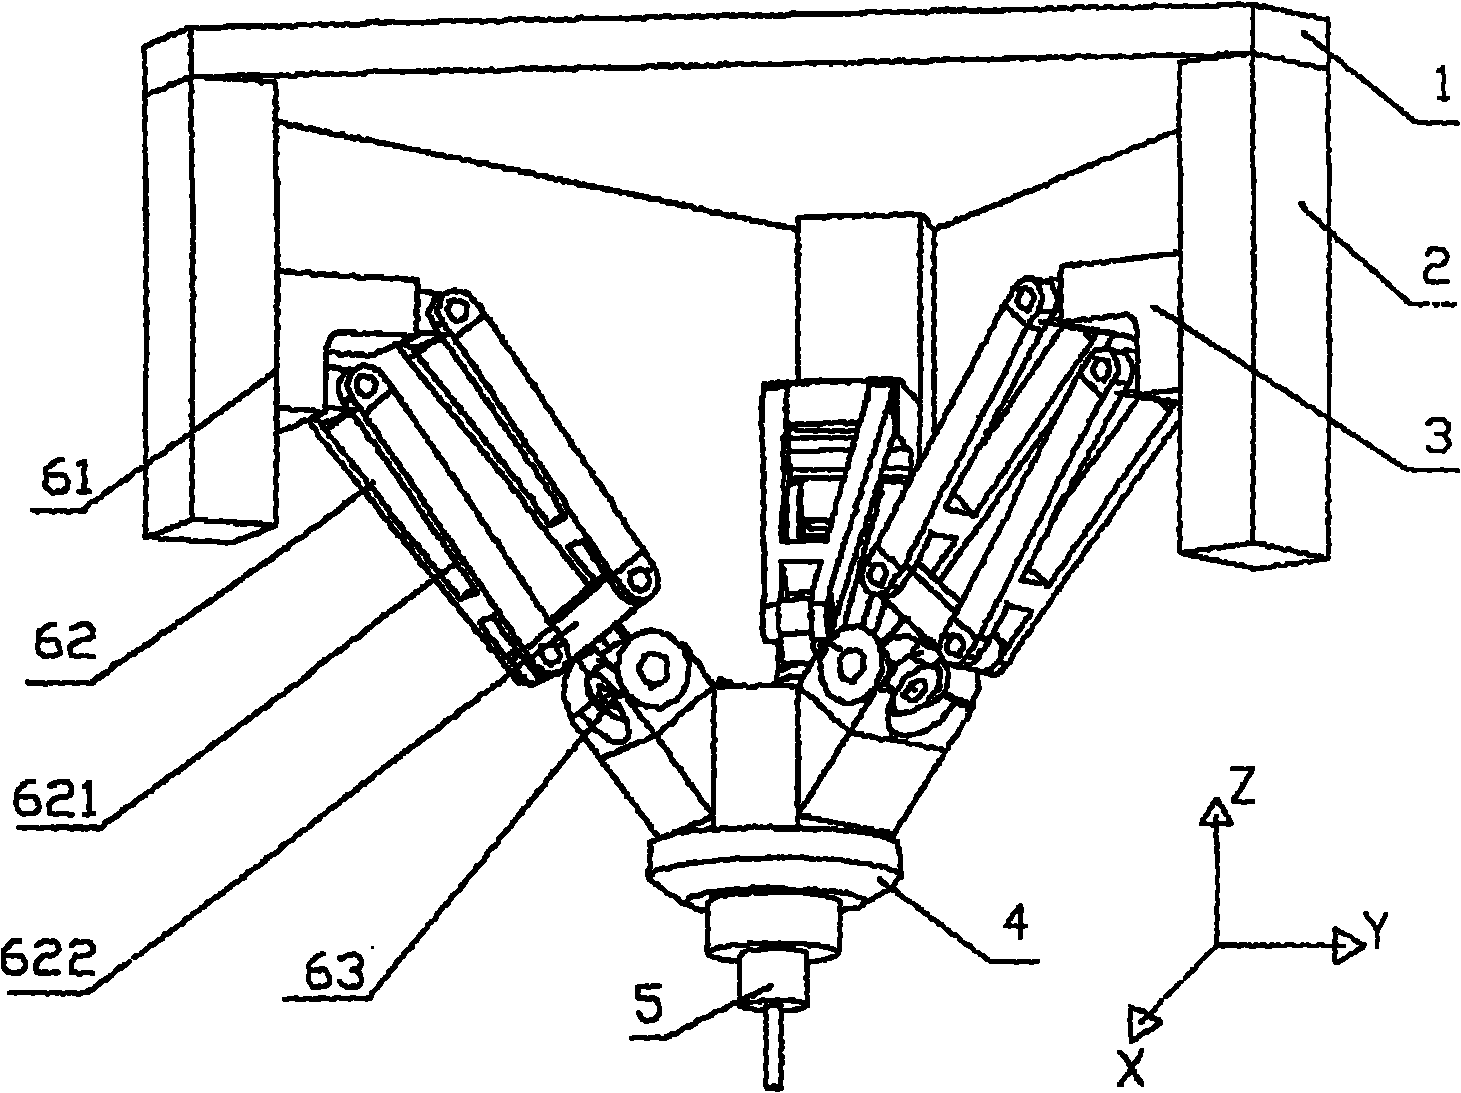 Parallel type three-axis main-shaft head structure